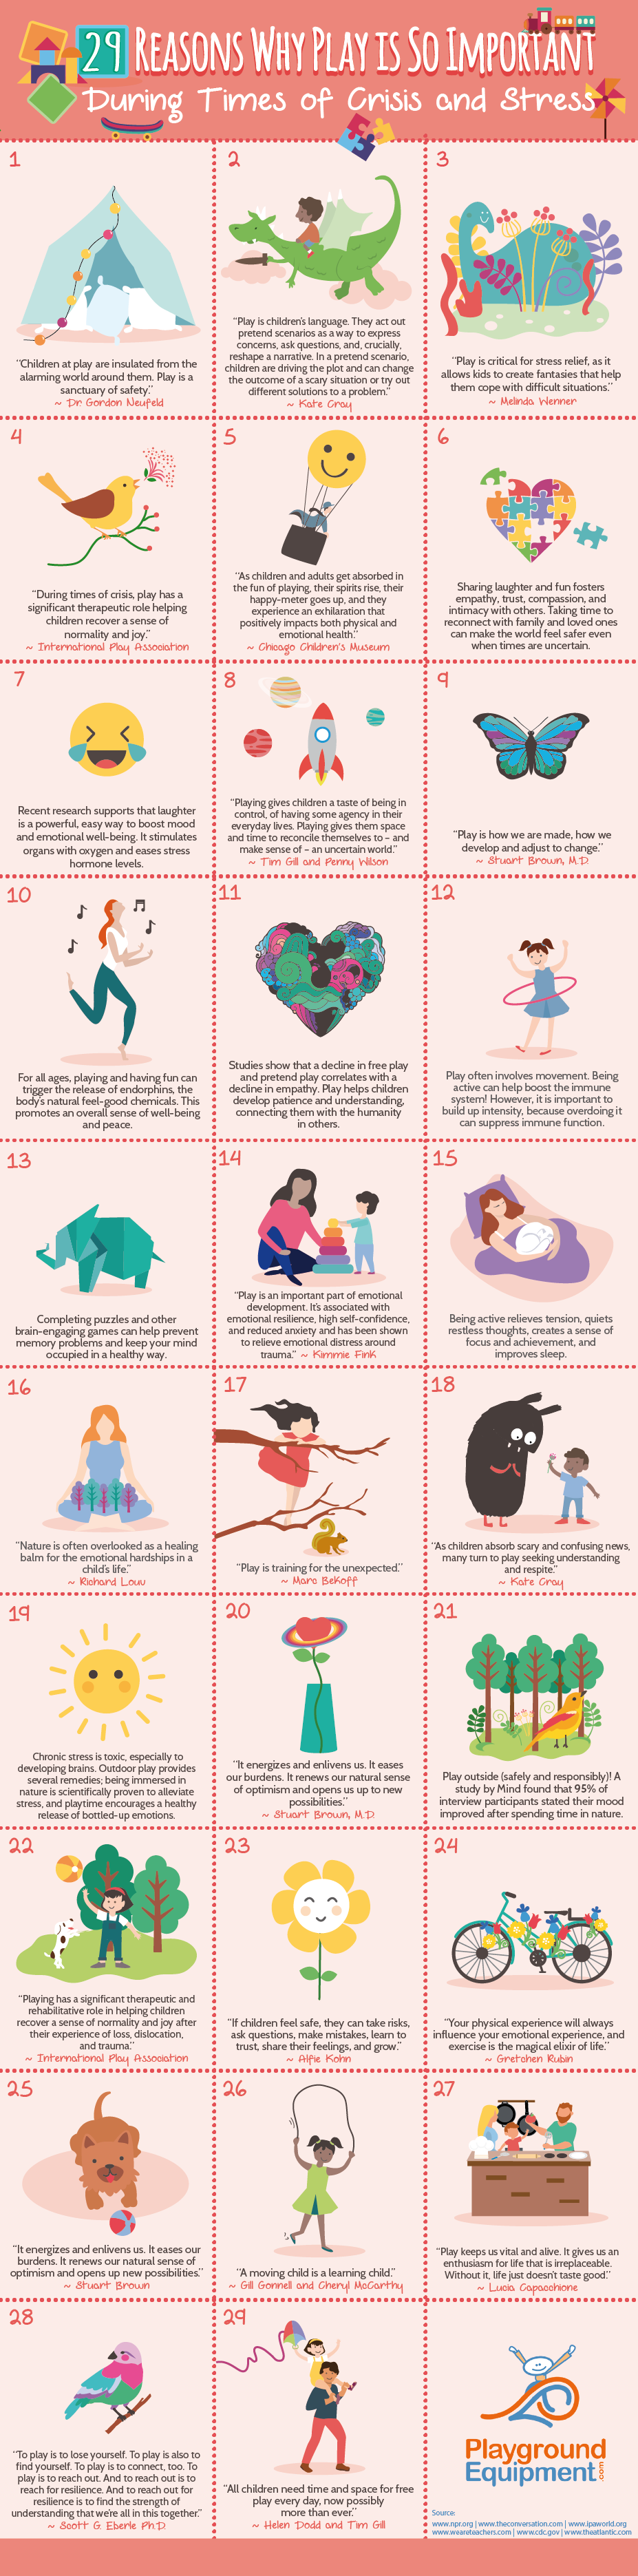 29 Reasons Why Play is So Important During Times of Crisis & Stress